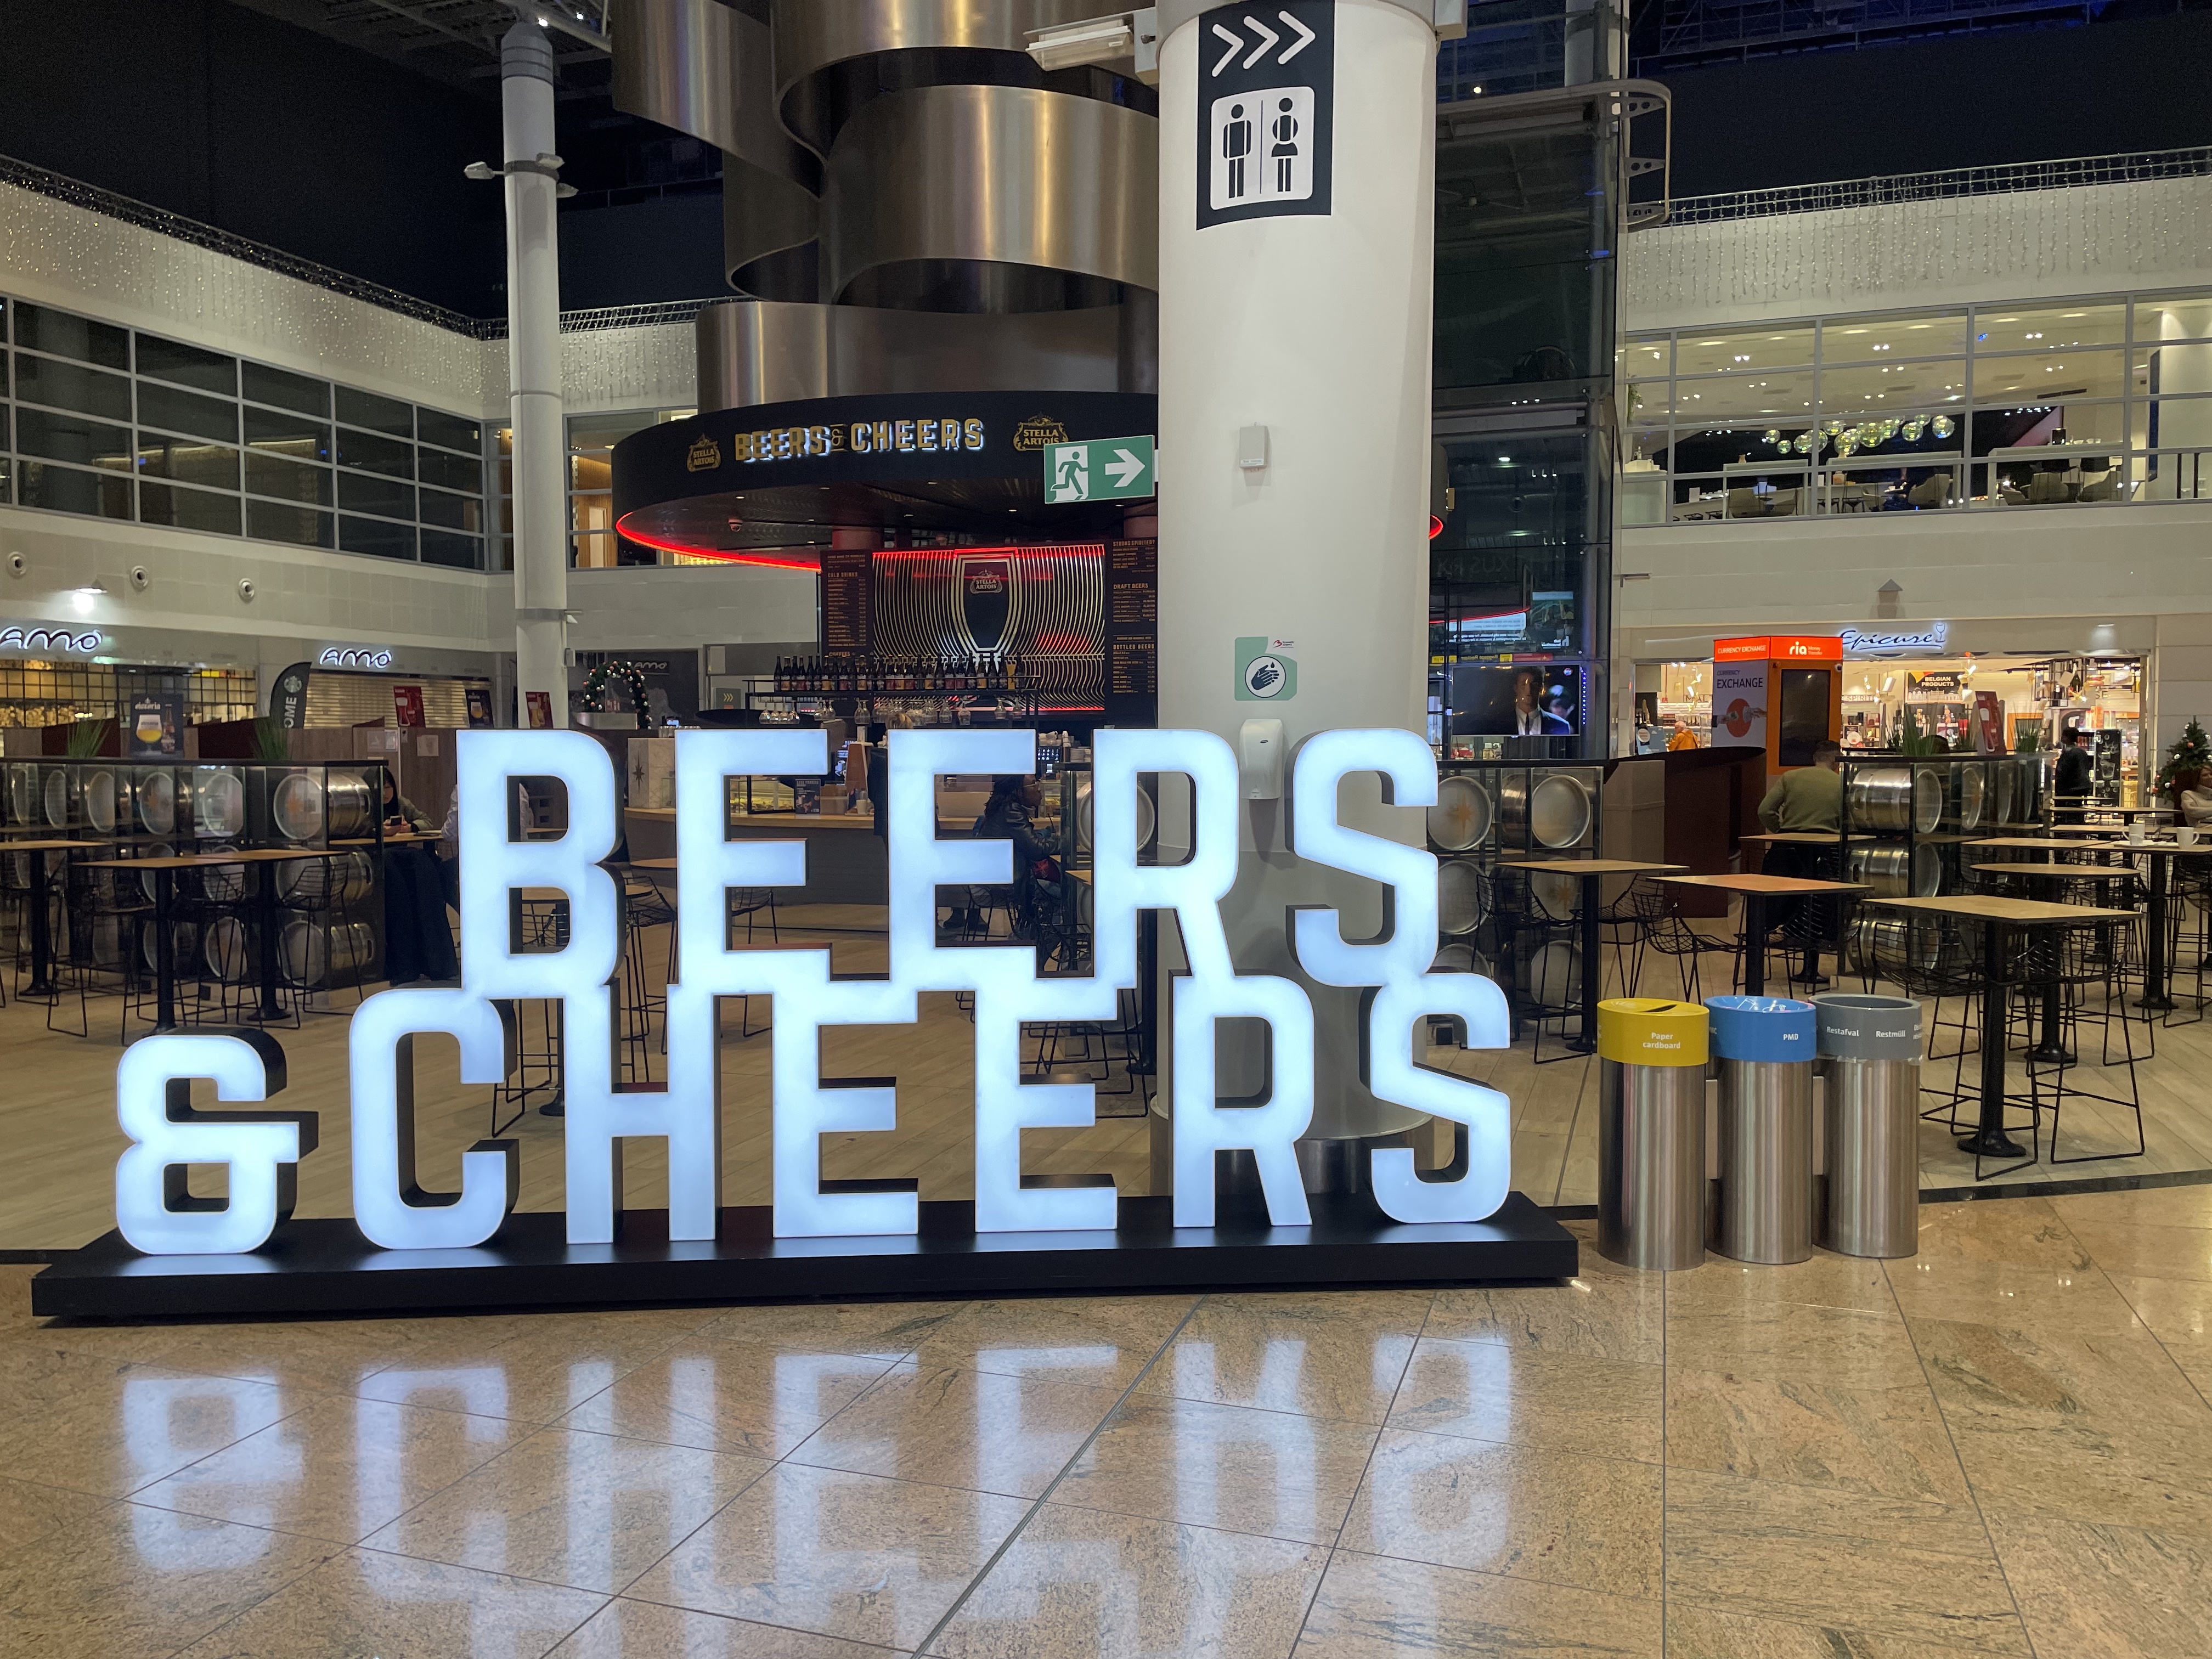 A large sign that says “Beers & Cheers”